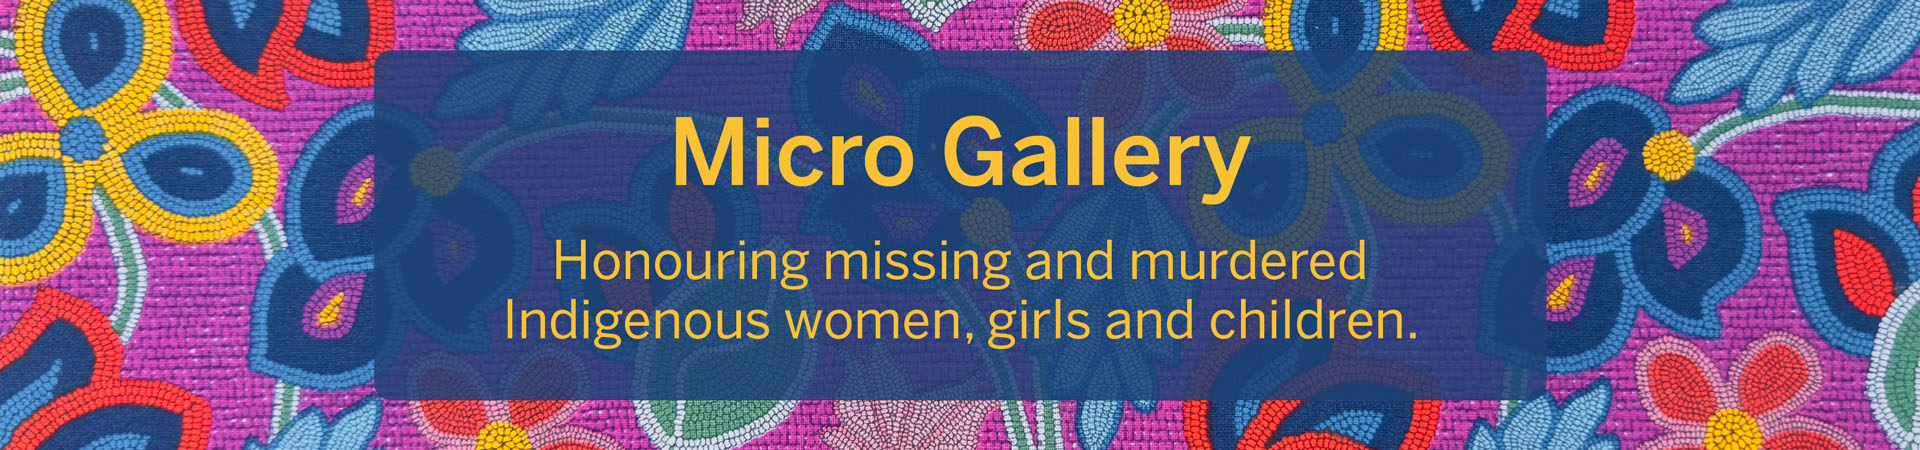 Micro Gallery - Honouring missing and murdered Indigenous women, girls, and children